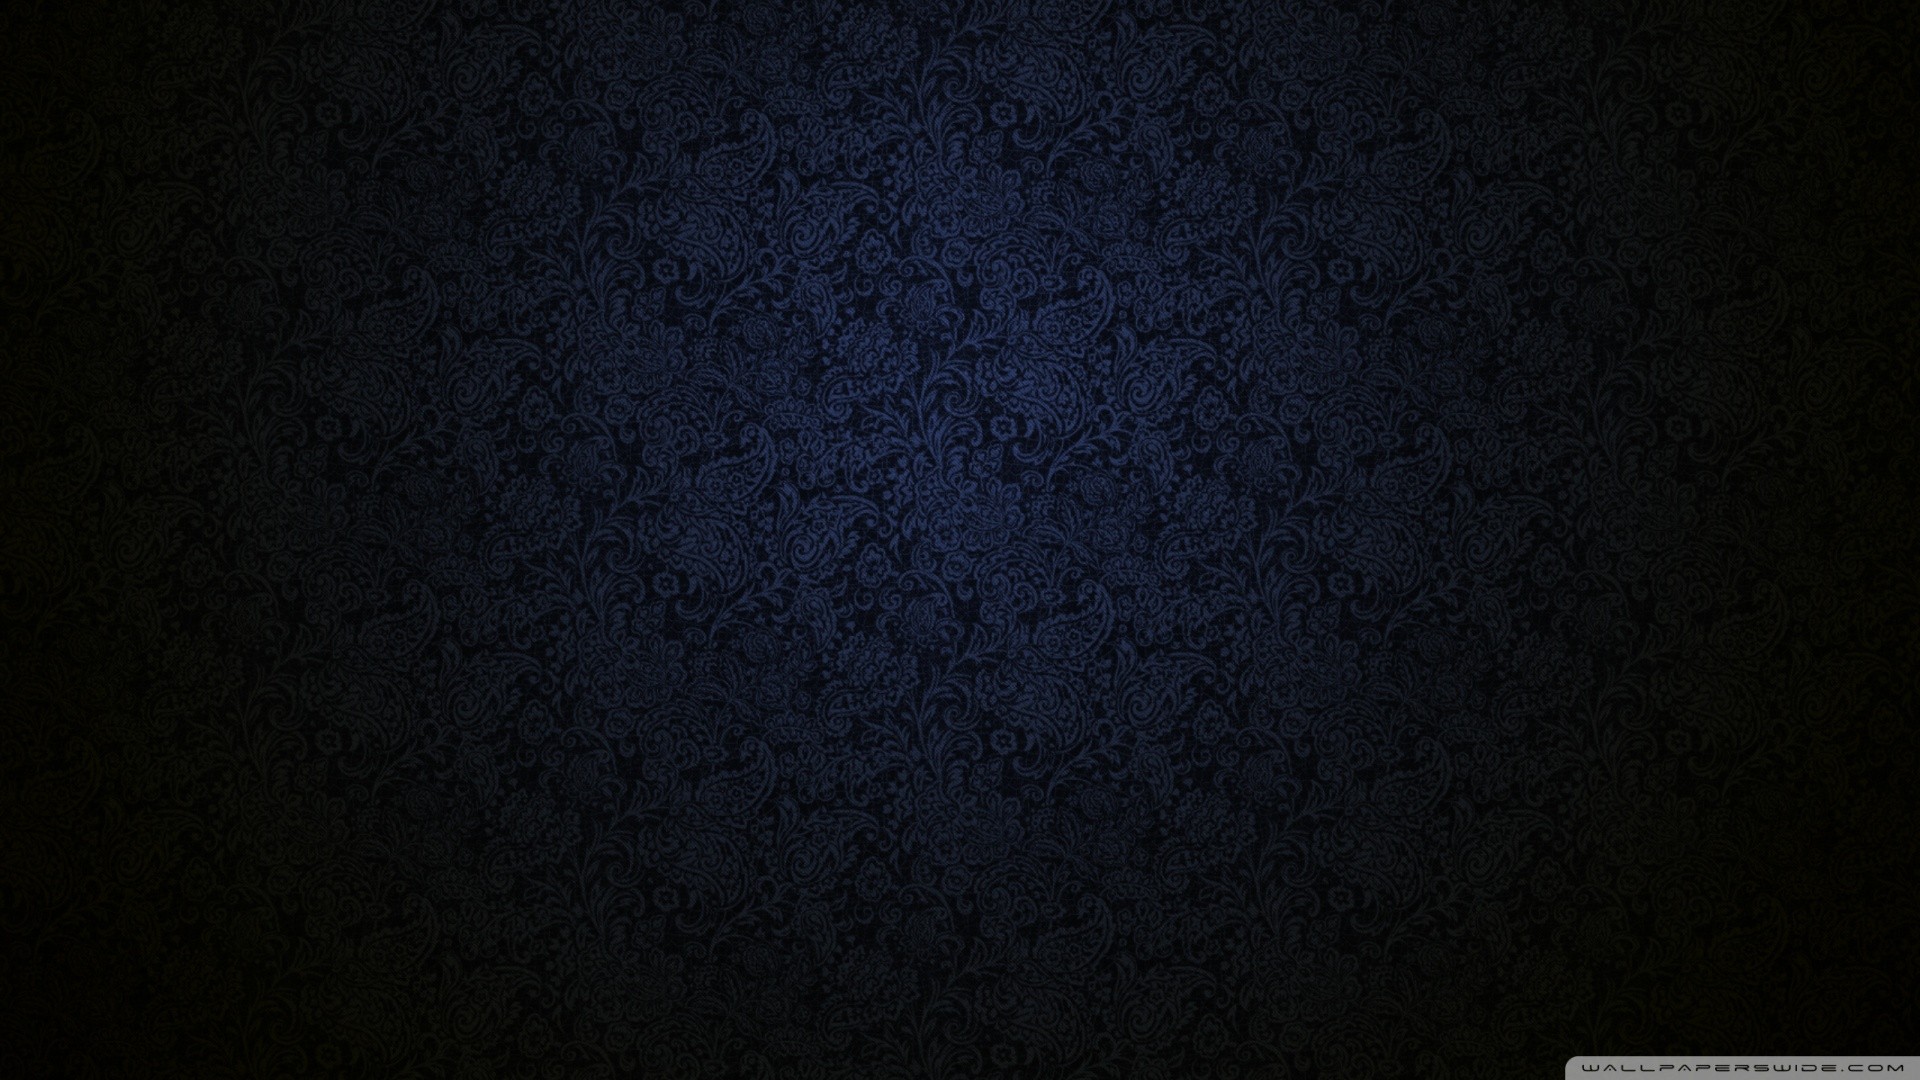 General 1920x1080 abstract low key dark texture pattern watermarked